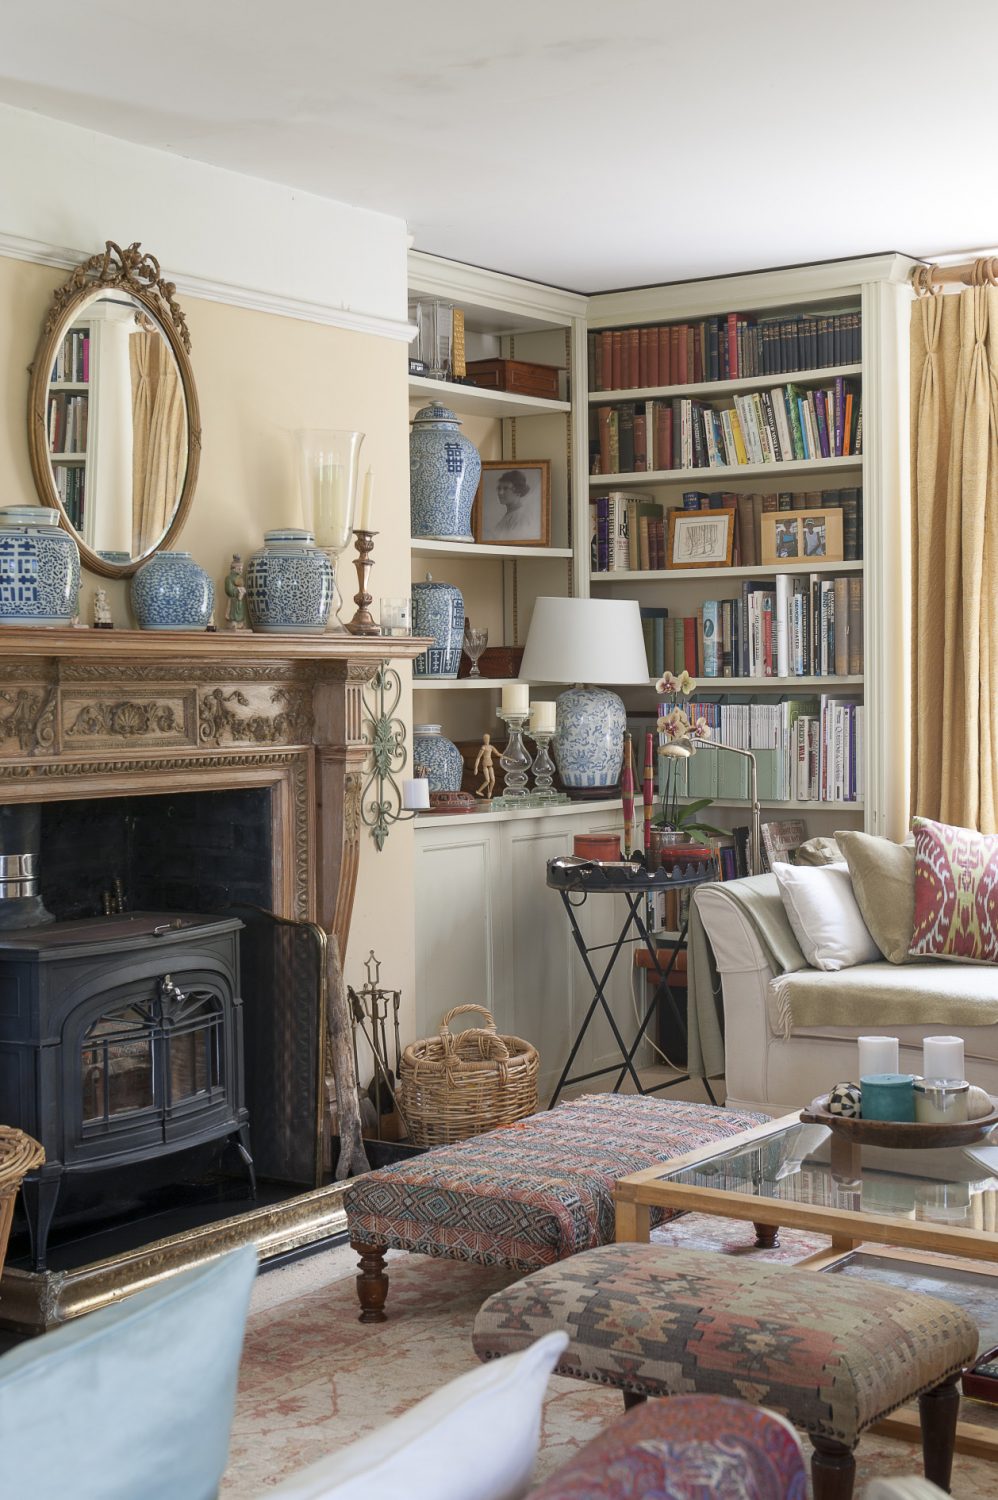 The sitting room is painted and decorated in shades of pale apricot with splashes of a heavenly soft pale green